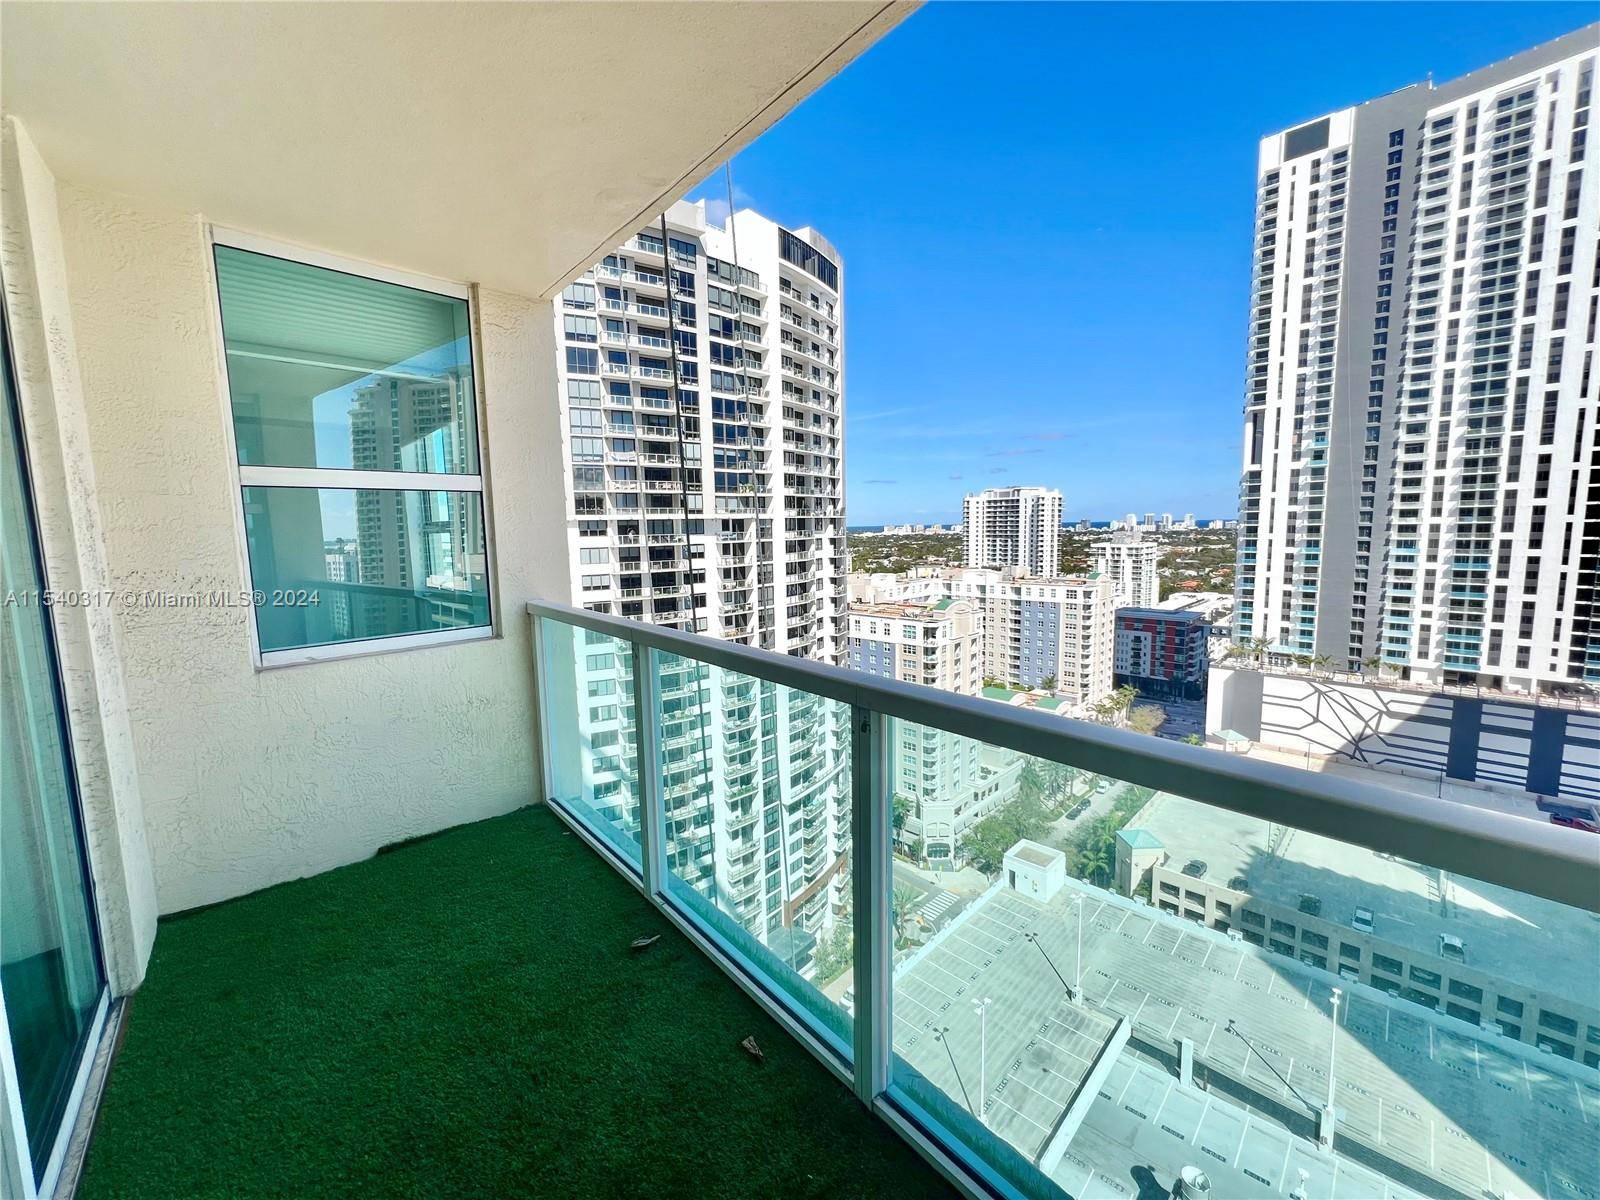 Don't miss an opportunity to own a 2 Bed 2 Bath split level condo with spectacular views, balcony to relax in the heart of Las Olas.